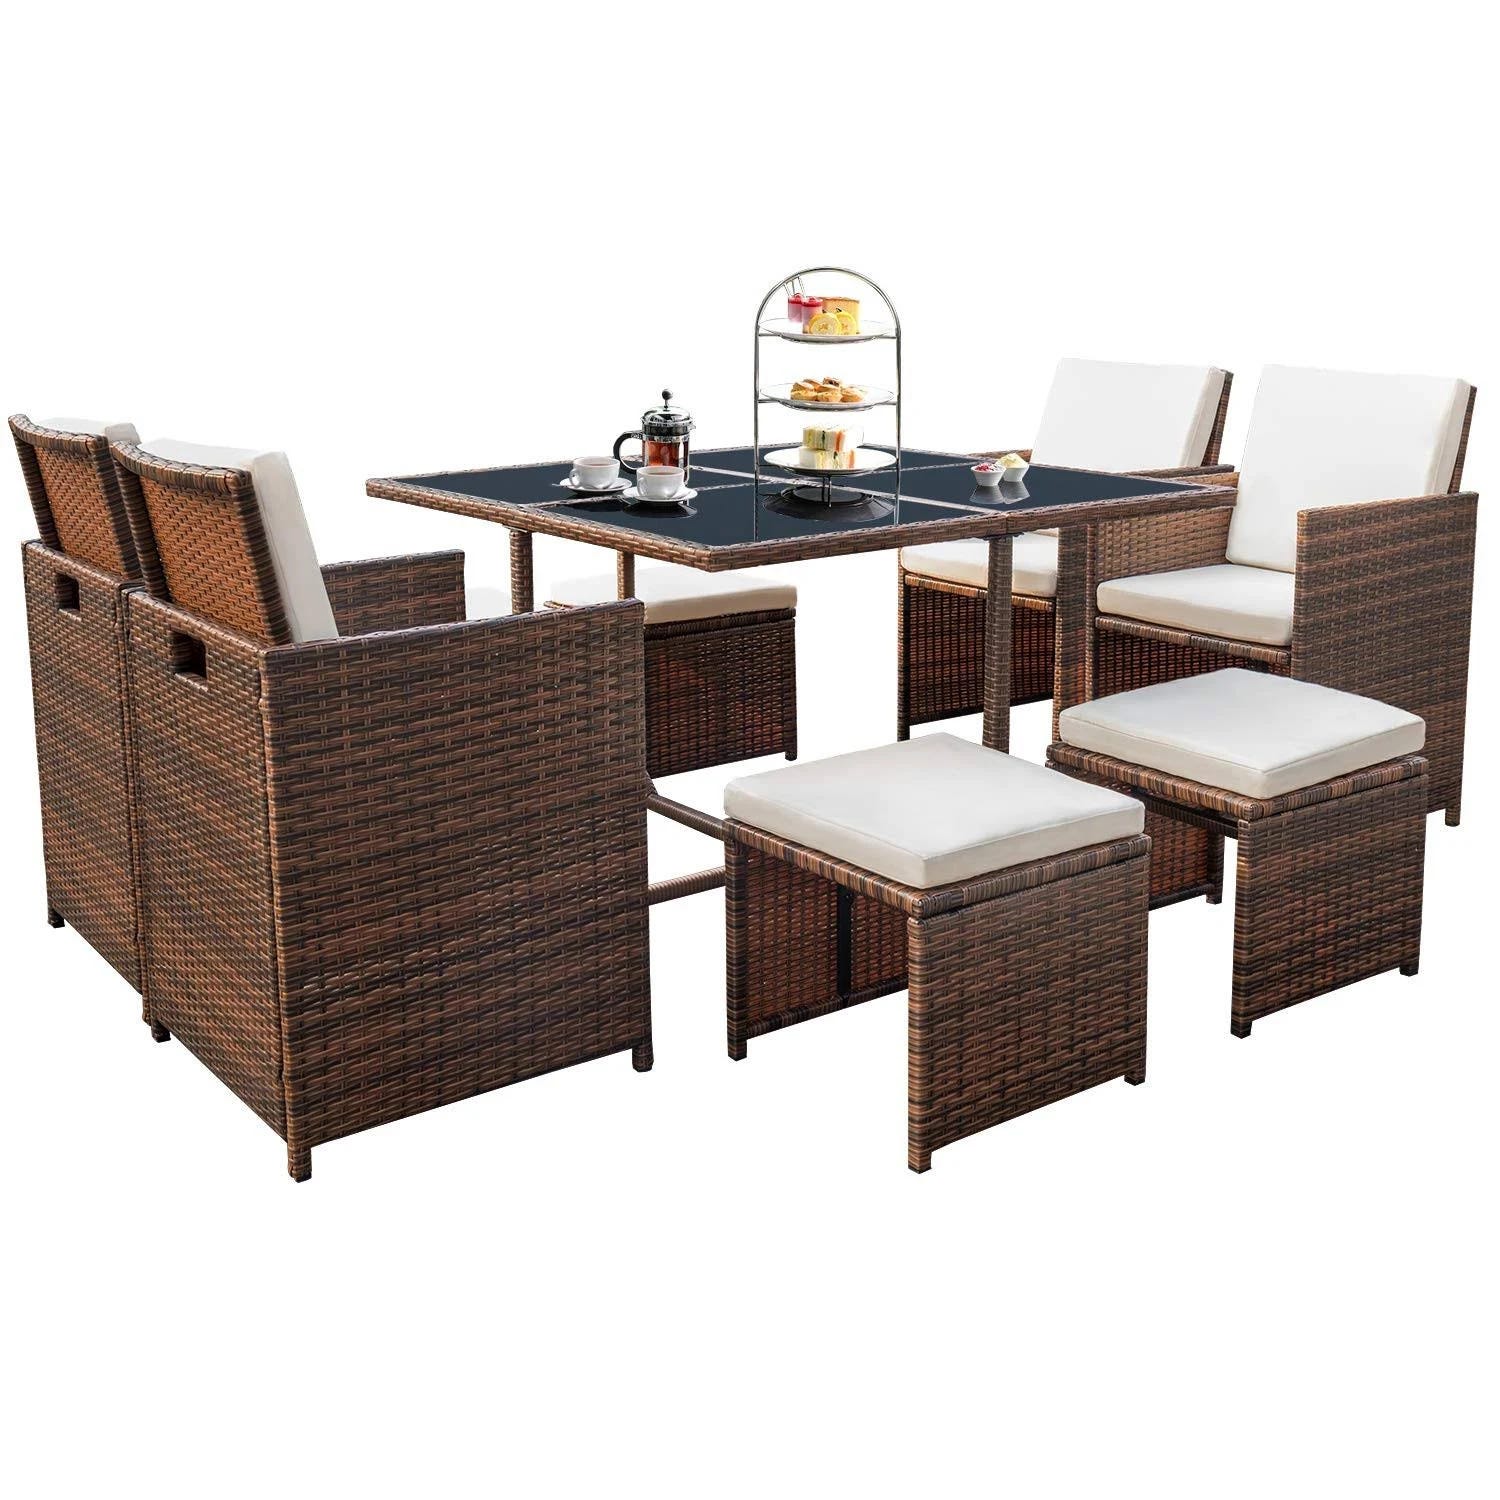 Chic Rattan Dining Set with Glass Table & Cushioned Seating | Image